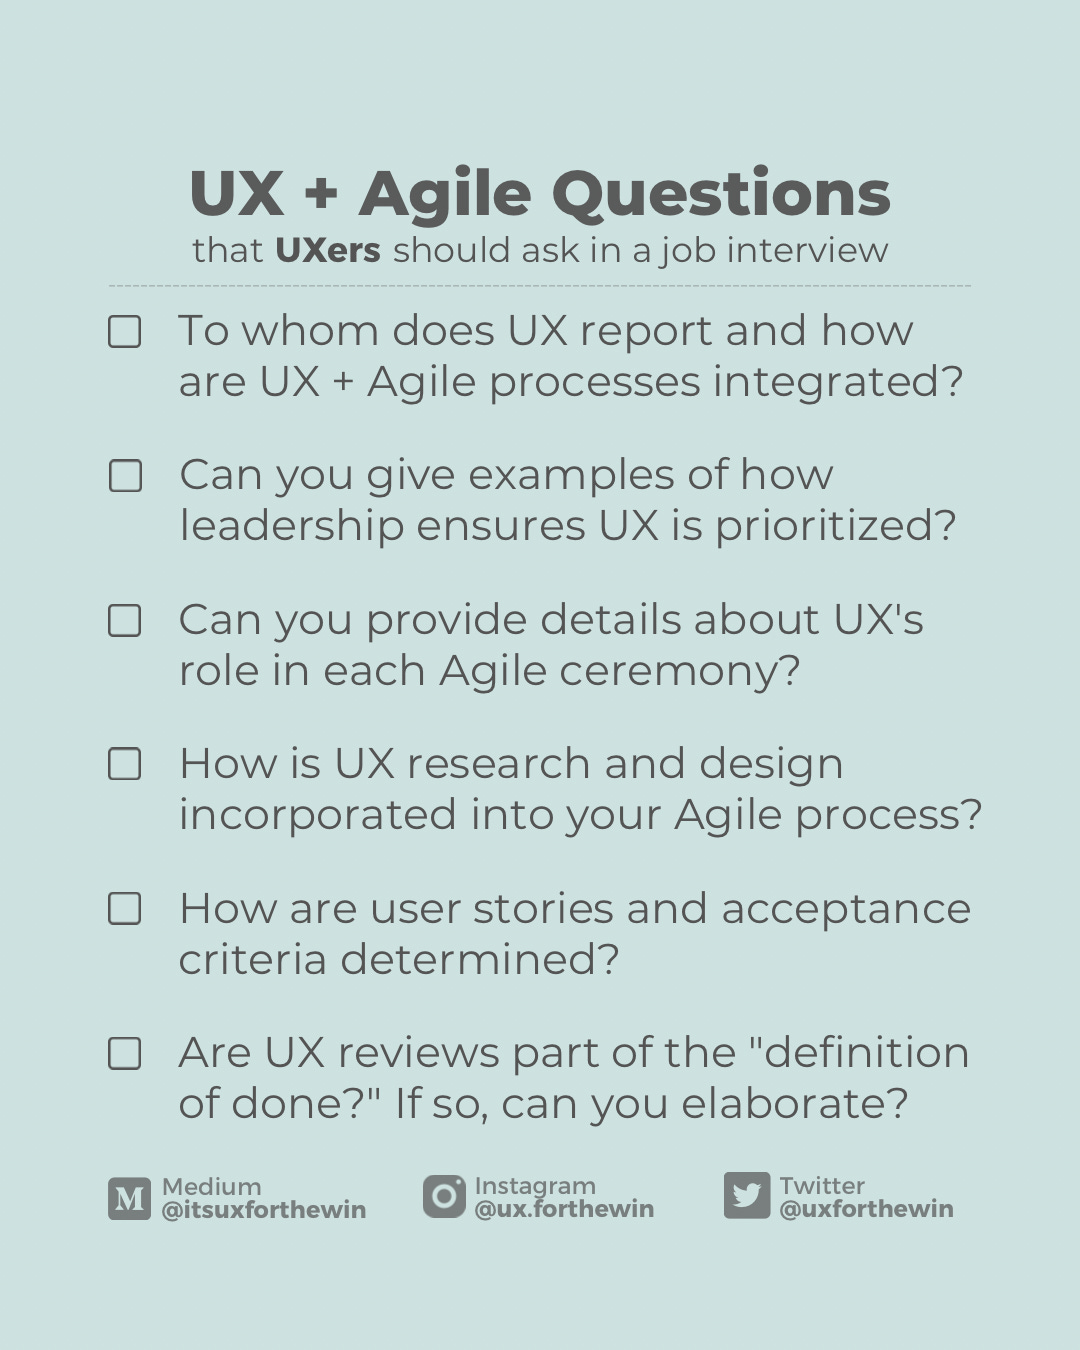 UX + Agile Questions that UXers should ask in a job interview  * To whom does UX report and how are UX + Agile processes integrated?  * Can you give examples of how leadership ensures UX is prioritized?  * Can you provide details about UX's role in each Agile ceremony?  * How is UX research and design incorporated into your Agile process?  * How are user stories and acceptance criteria determined?  * Are UX reviews part of the "definition of done?" If so, can you elaborate?